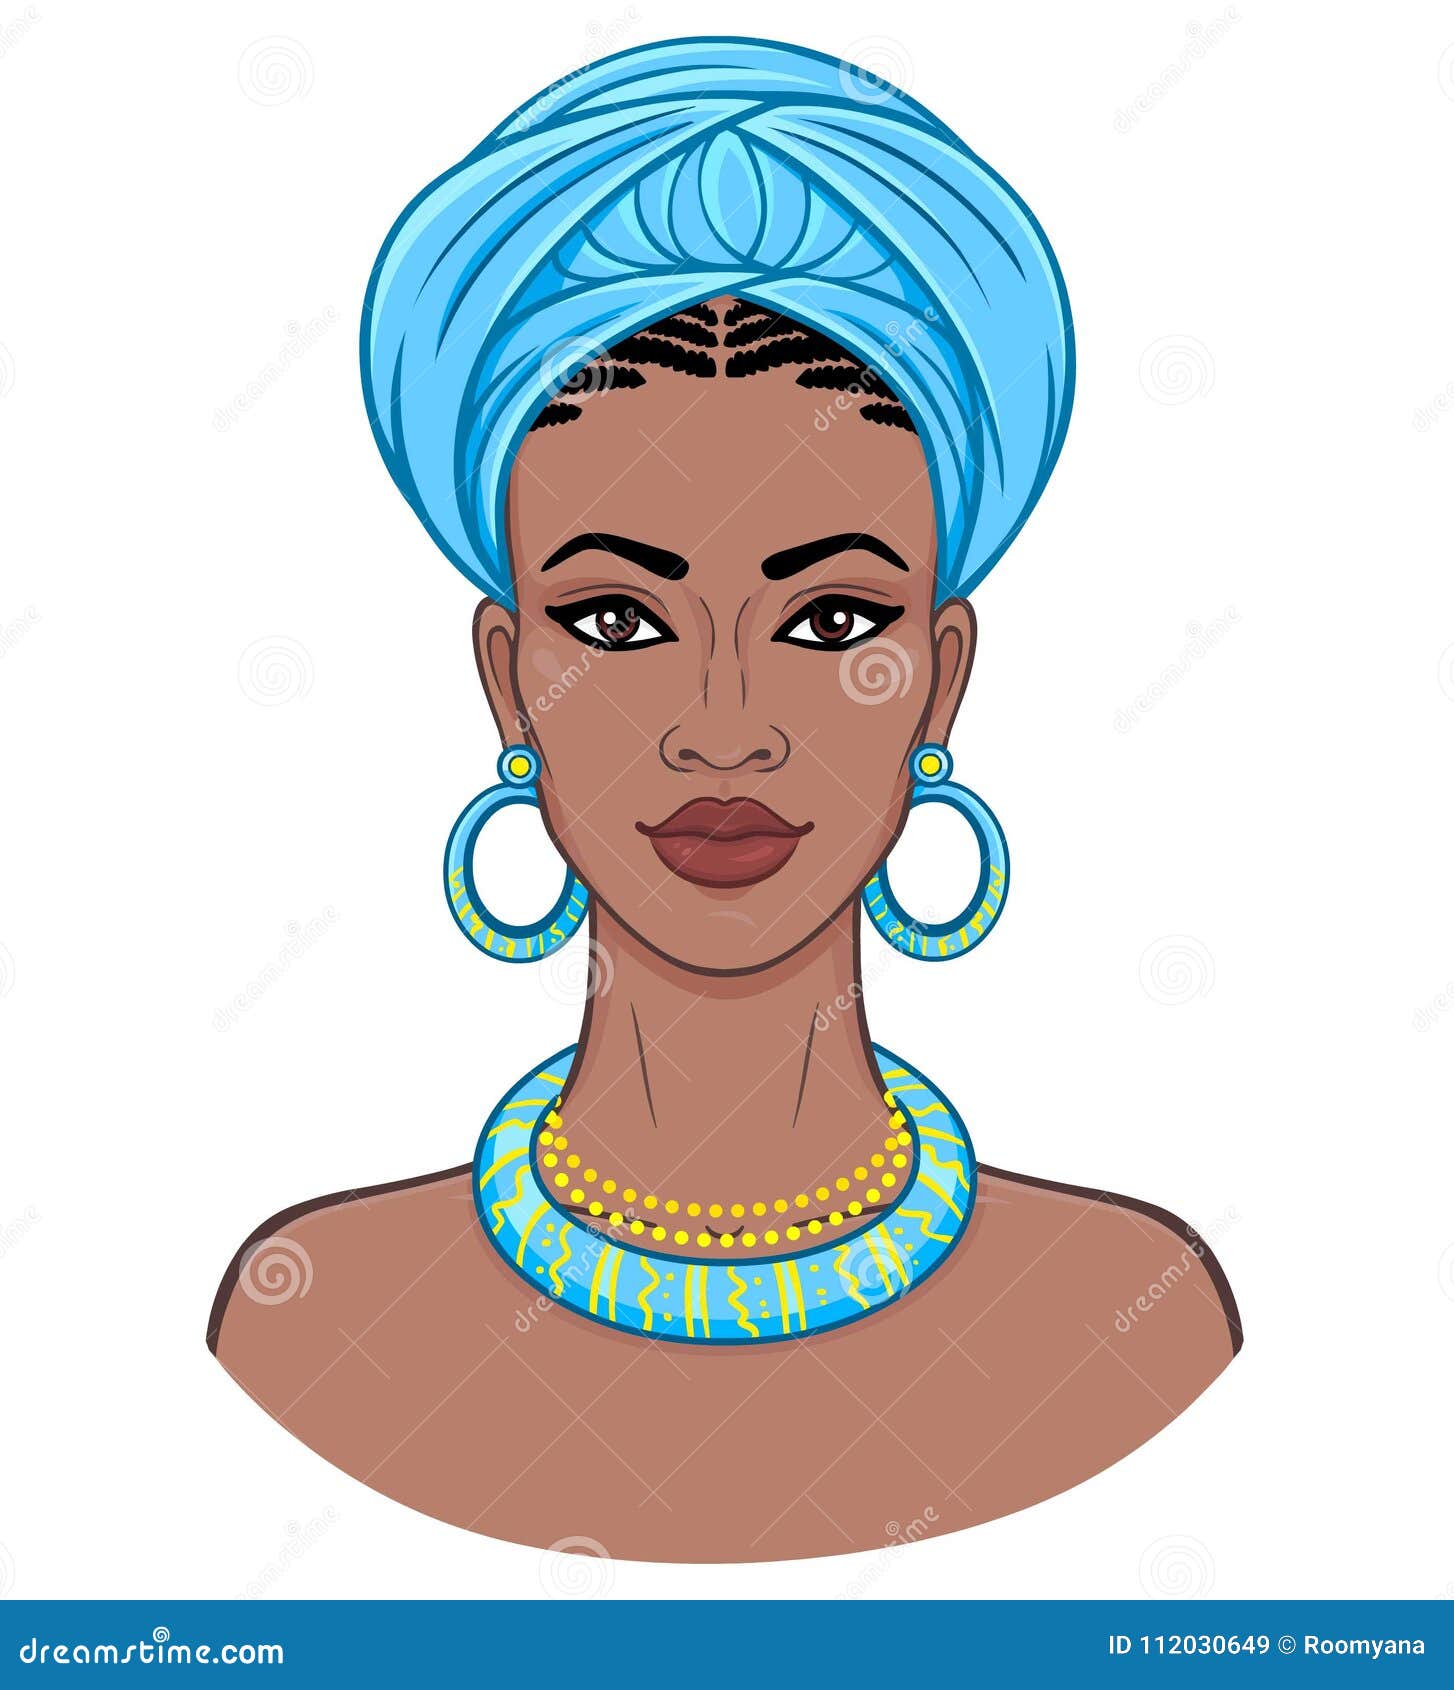 african beauty. animation portrait of the young black woman in a turban.